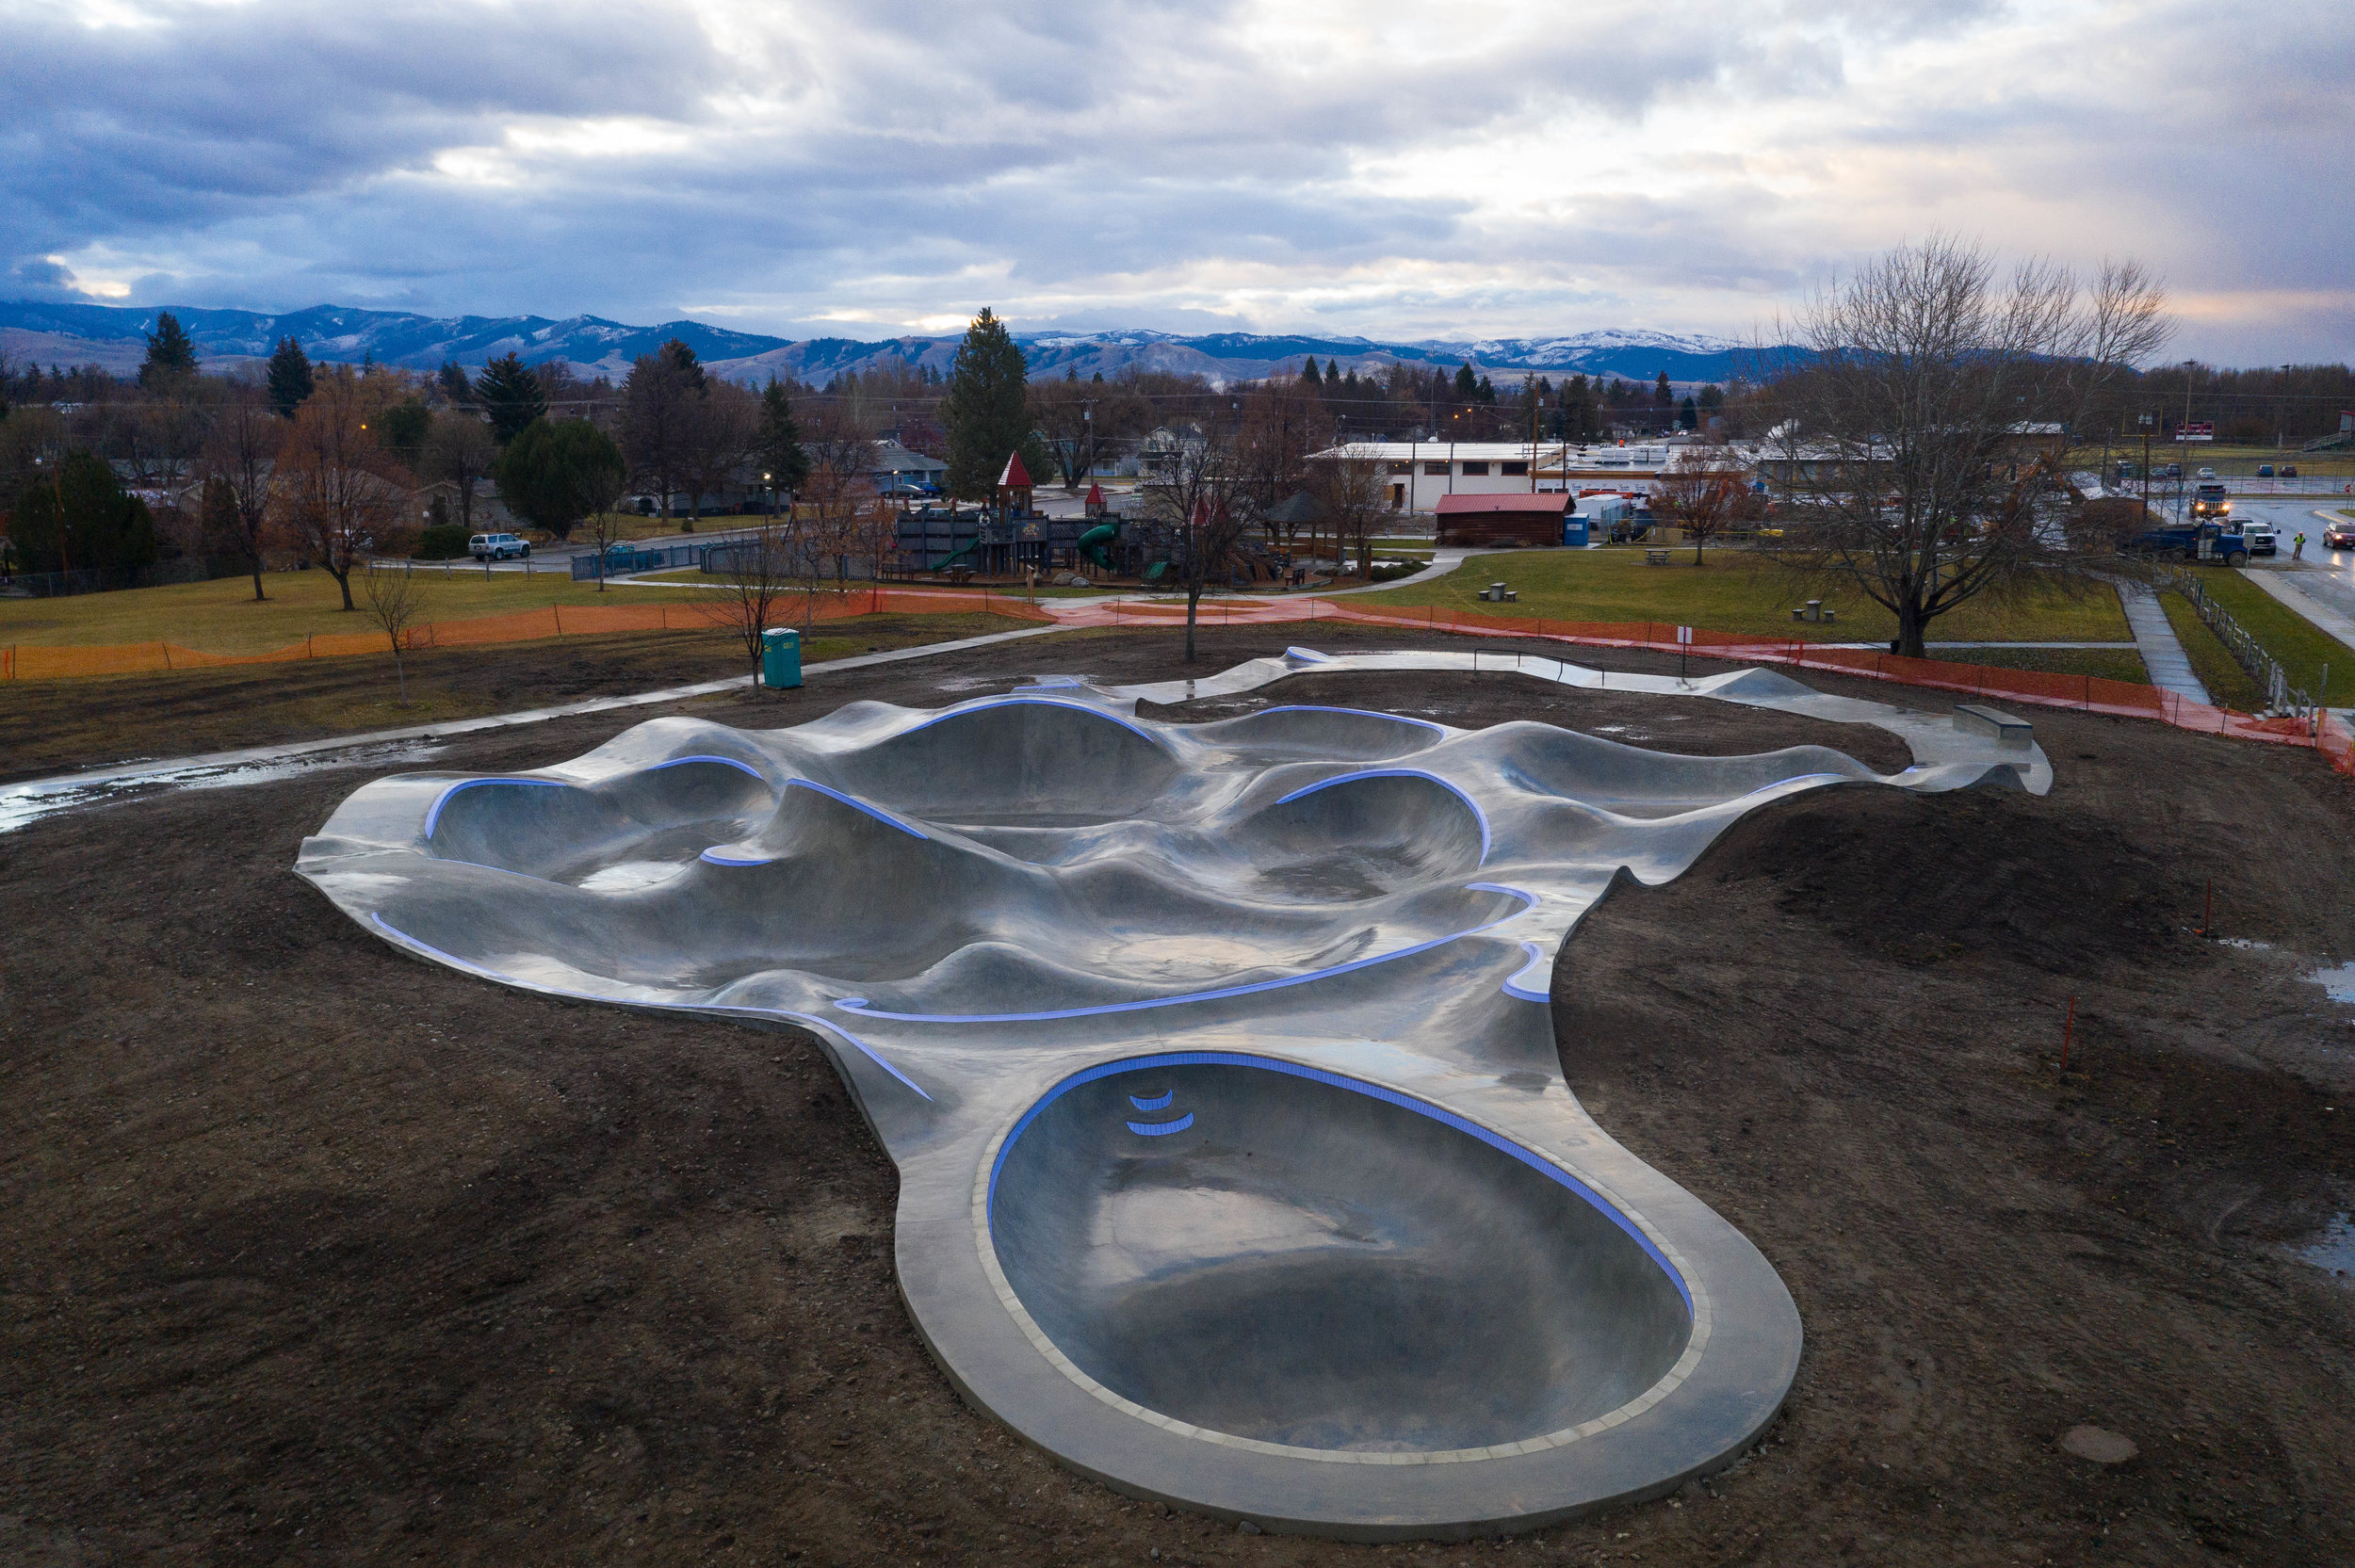 The beautiful Hamilton, Montana skatepark 💯 have you been yet? There are two other awesome Evergreen 🌲 parks within 30 minutes of this gem 💎 